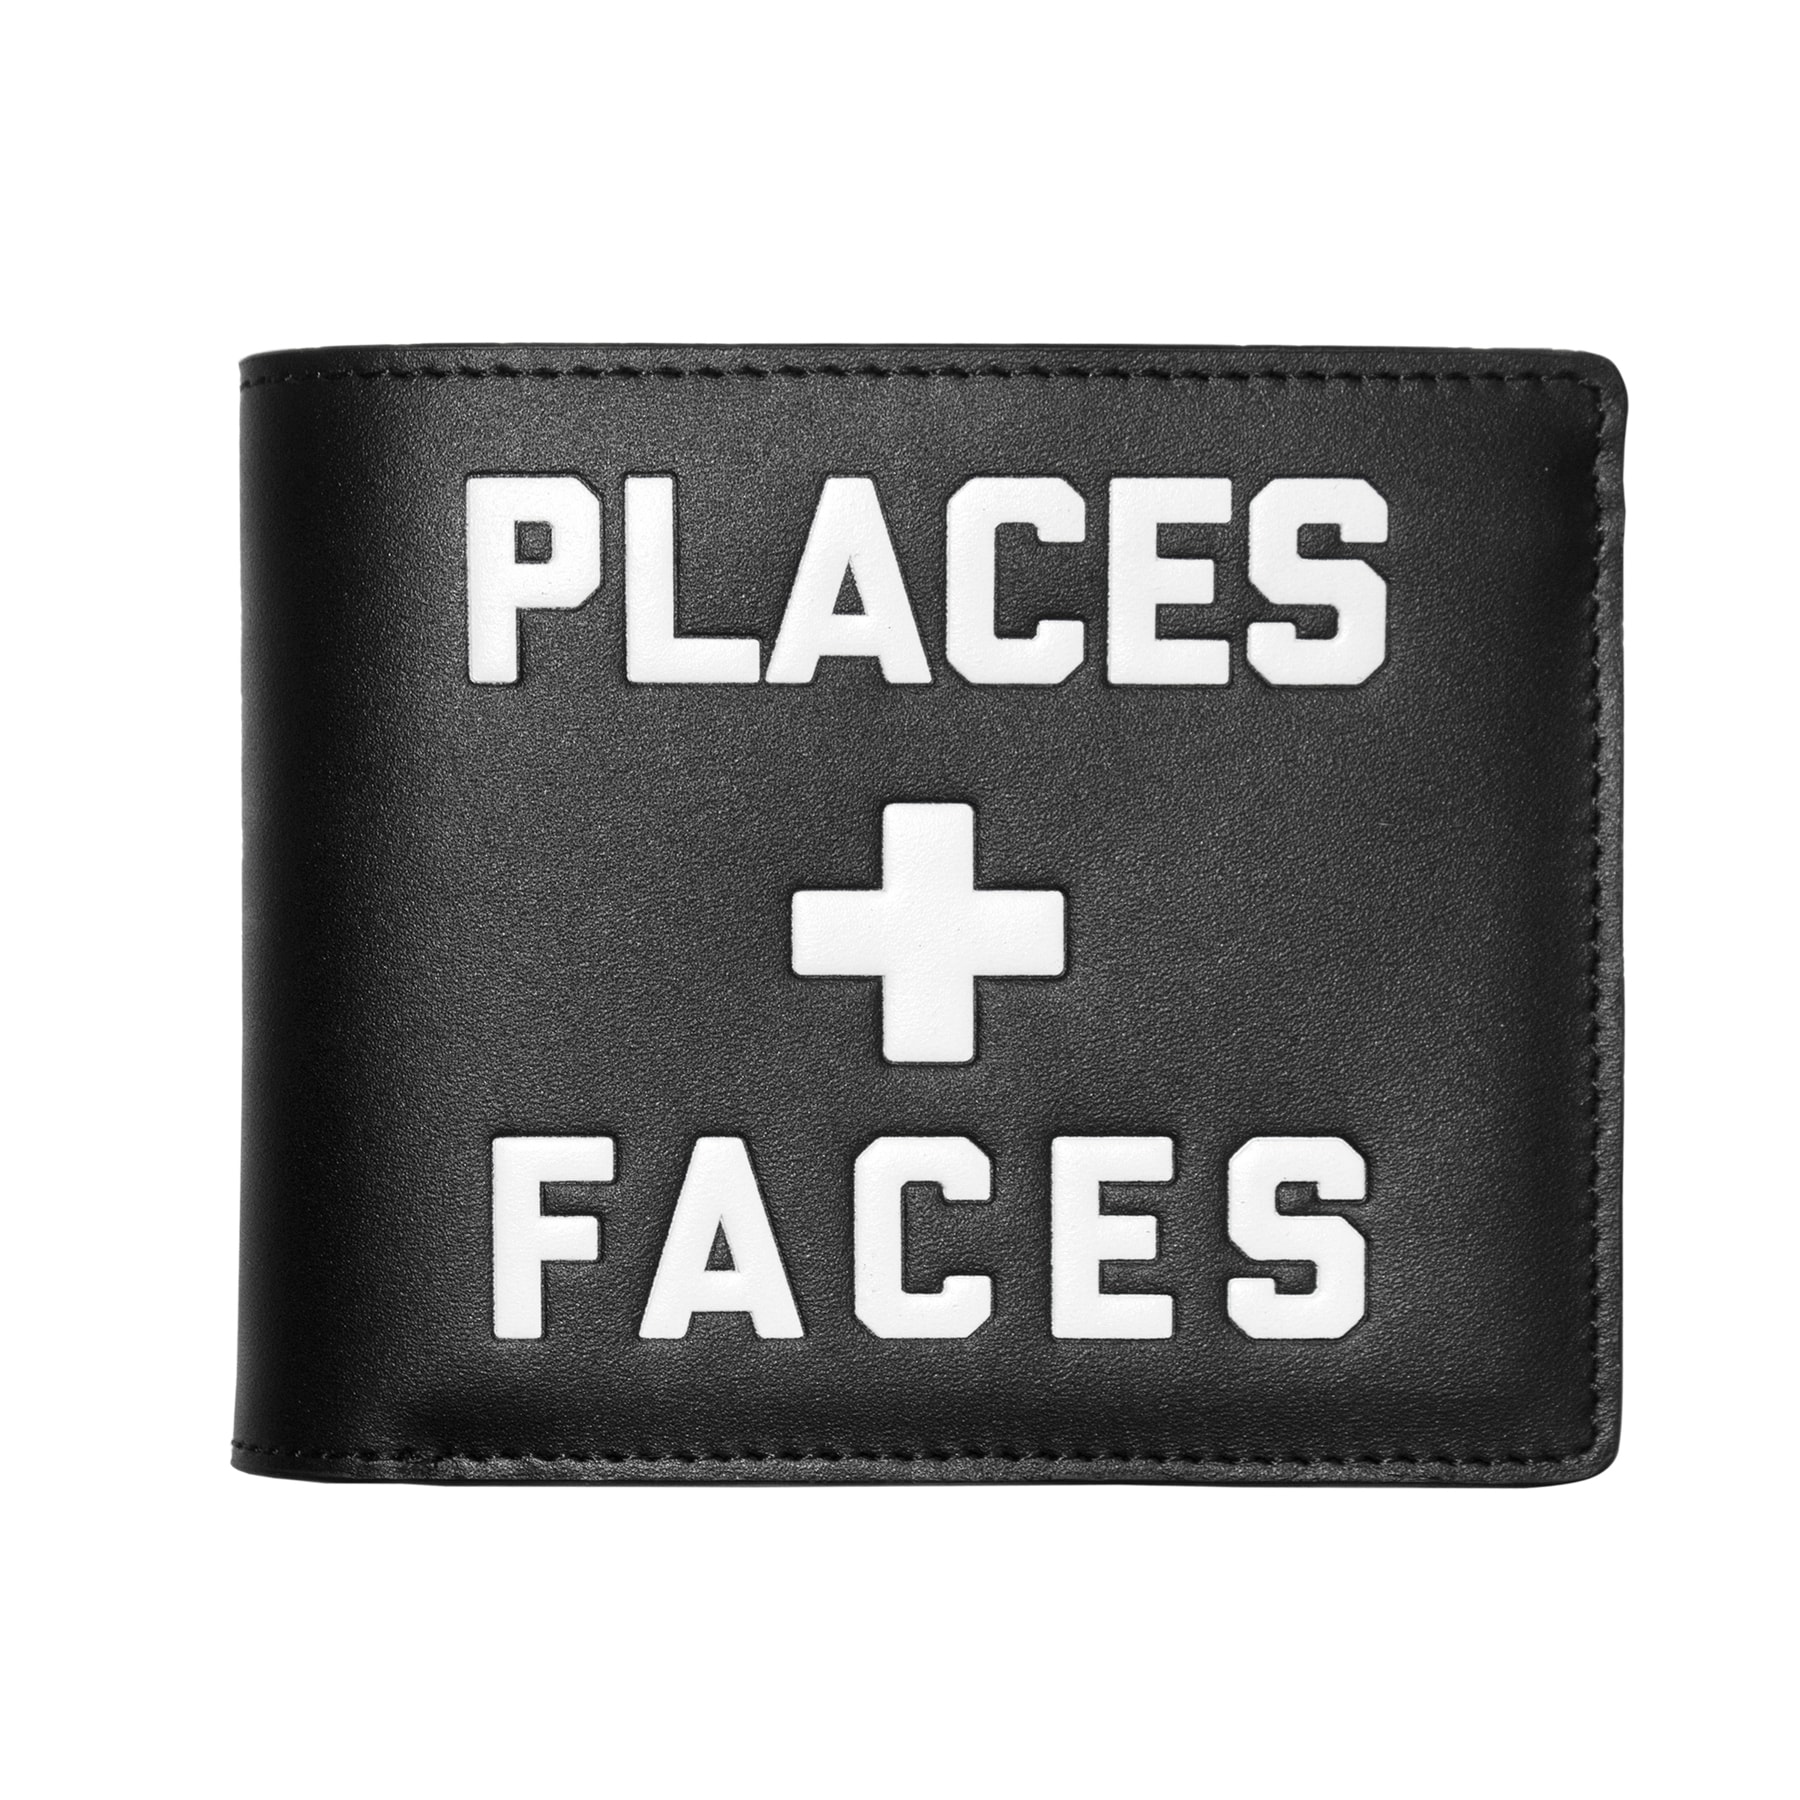 Places + Faces Spring Summer 2018 Windbreaker Side stripe pants PVC Side Tote bag 5 year anniversary Flags T-shirt hoodie Medicom Fabricks Collaboration Pillow Floor matt slippers utility belt Skate Deck Accessories Sharpie Disposable Camera Water Pistol USB 3.0 Deck of Cards Wallet Cardholder Lanyard